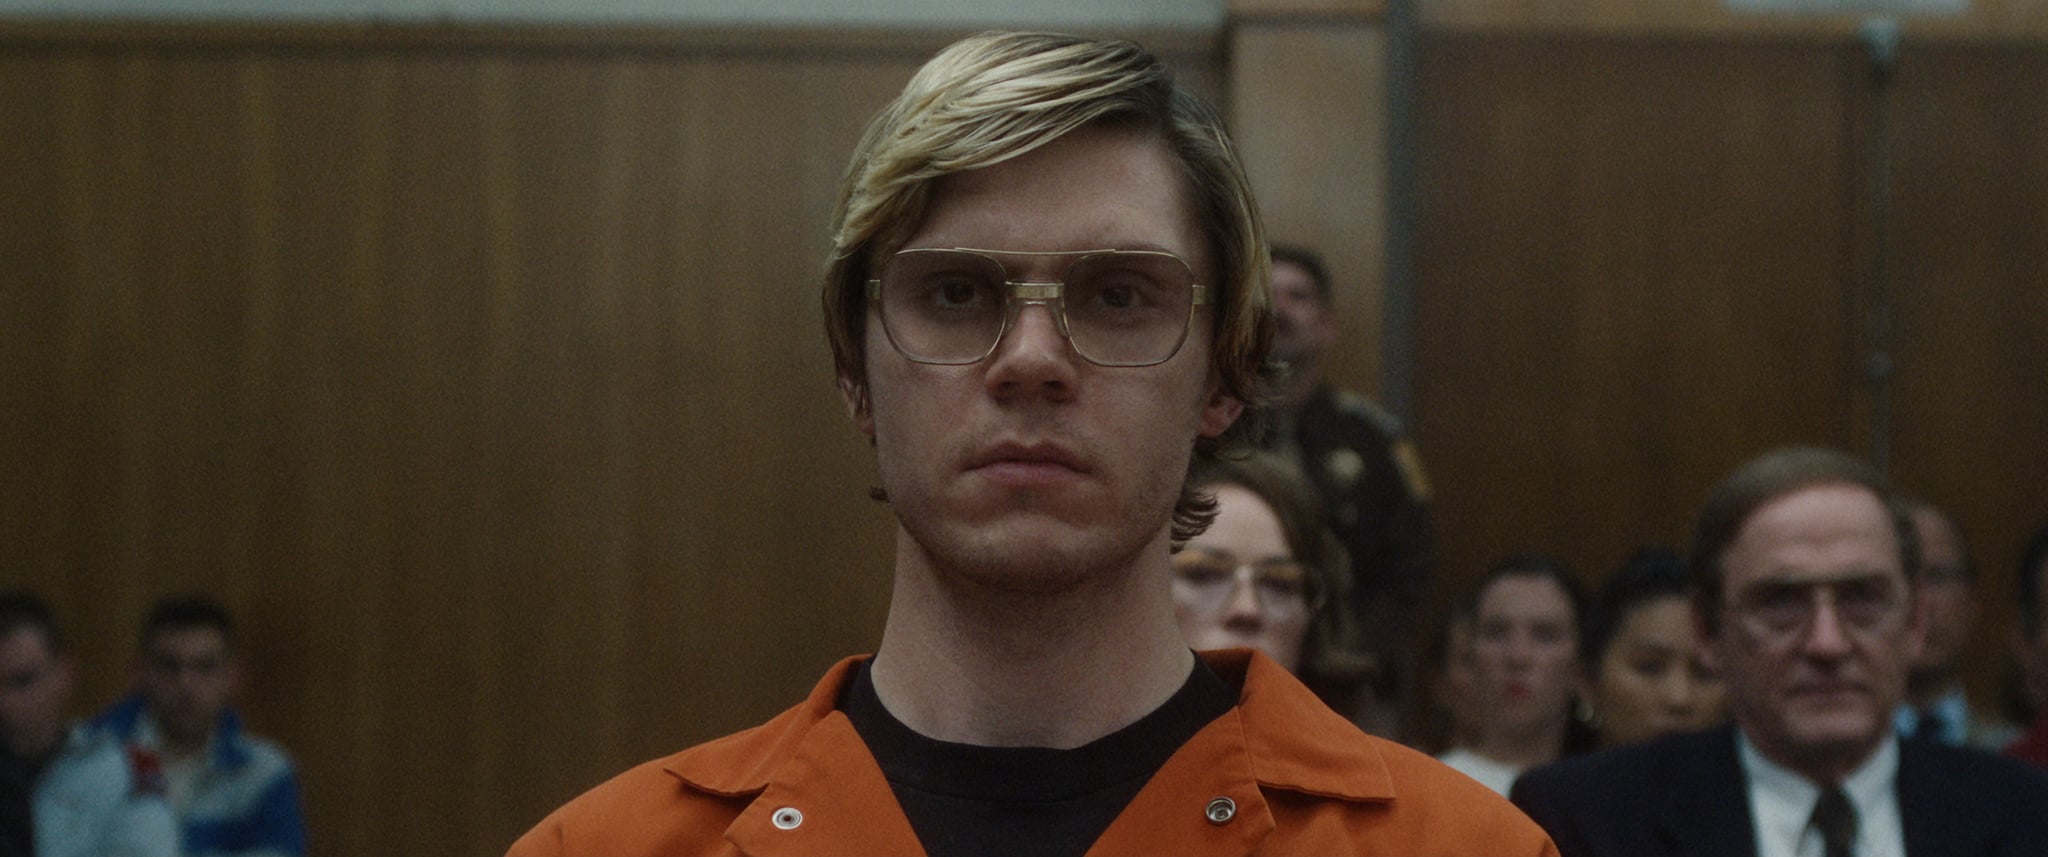 Ryan Murphy Says Evan Peters Wanted to Do Something “Normal” Instead of Dahmer